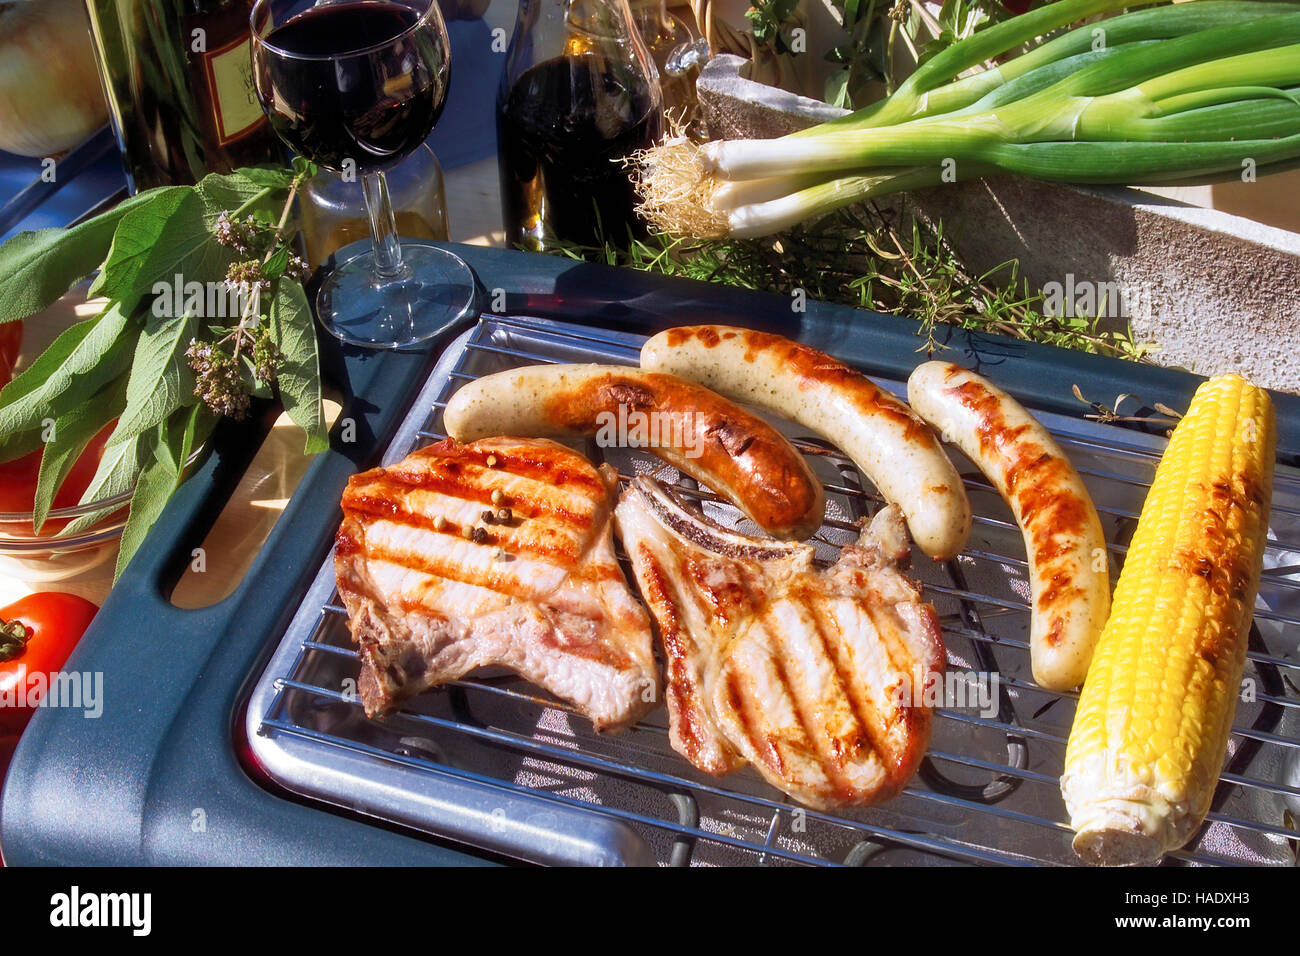 Outdoor barbecue, meat chops, sausages, spring onions, herbs, corn on the cob, red wine Stock Photo